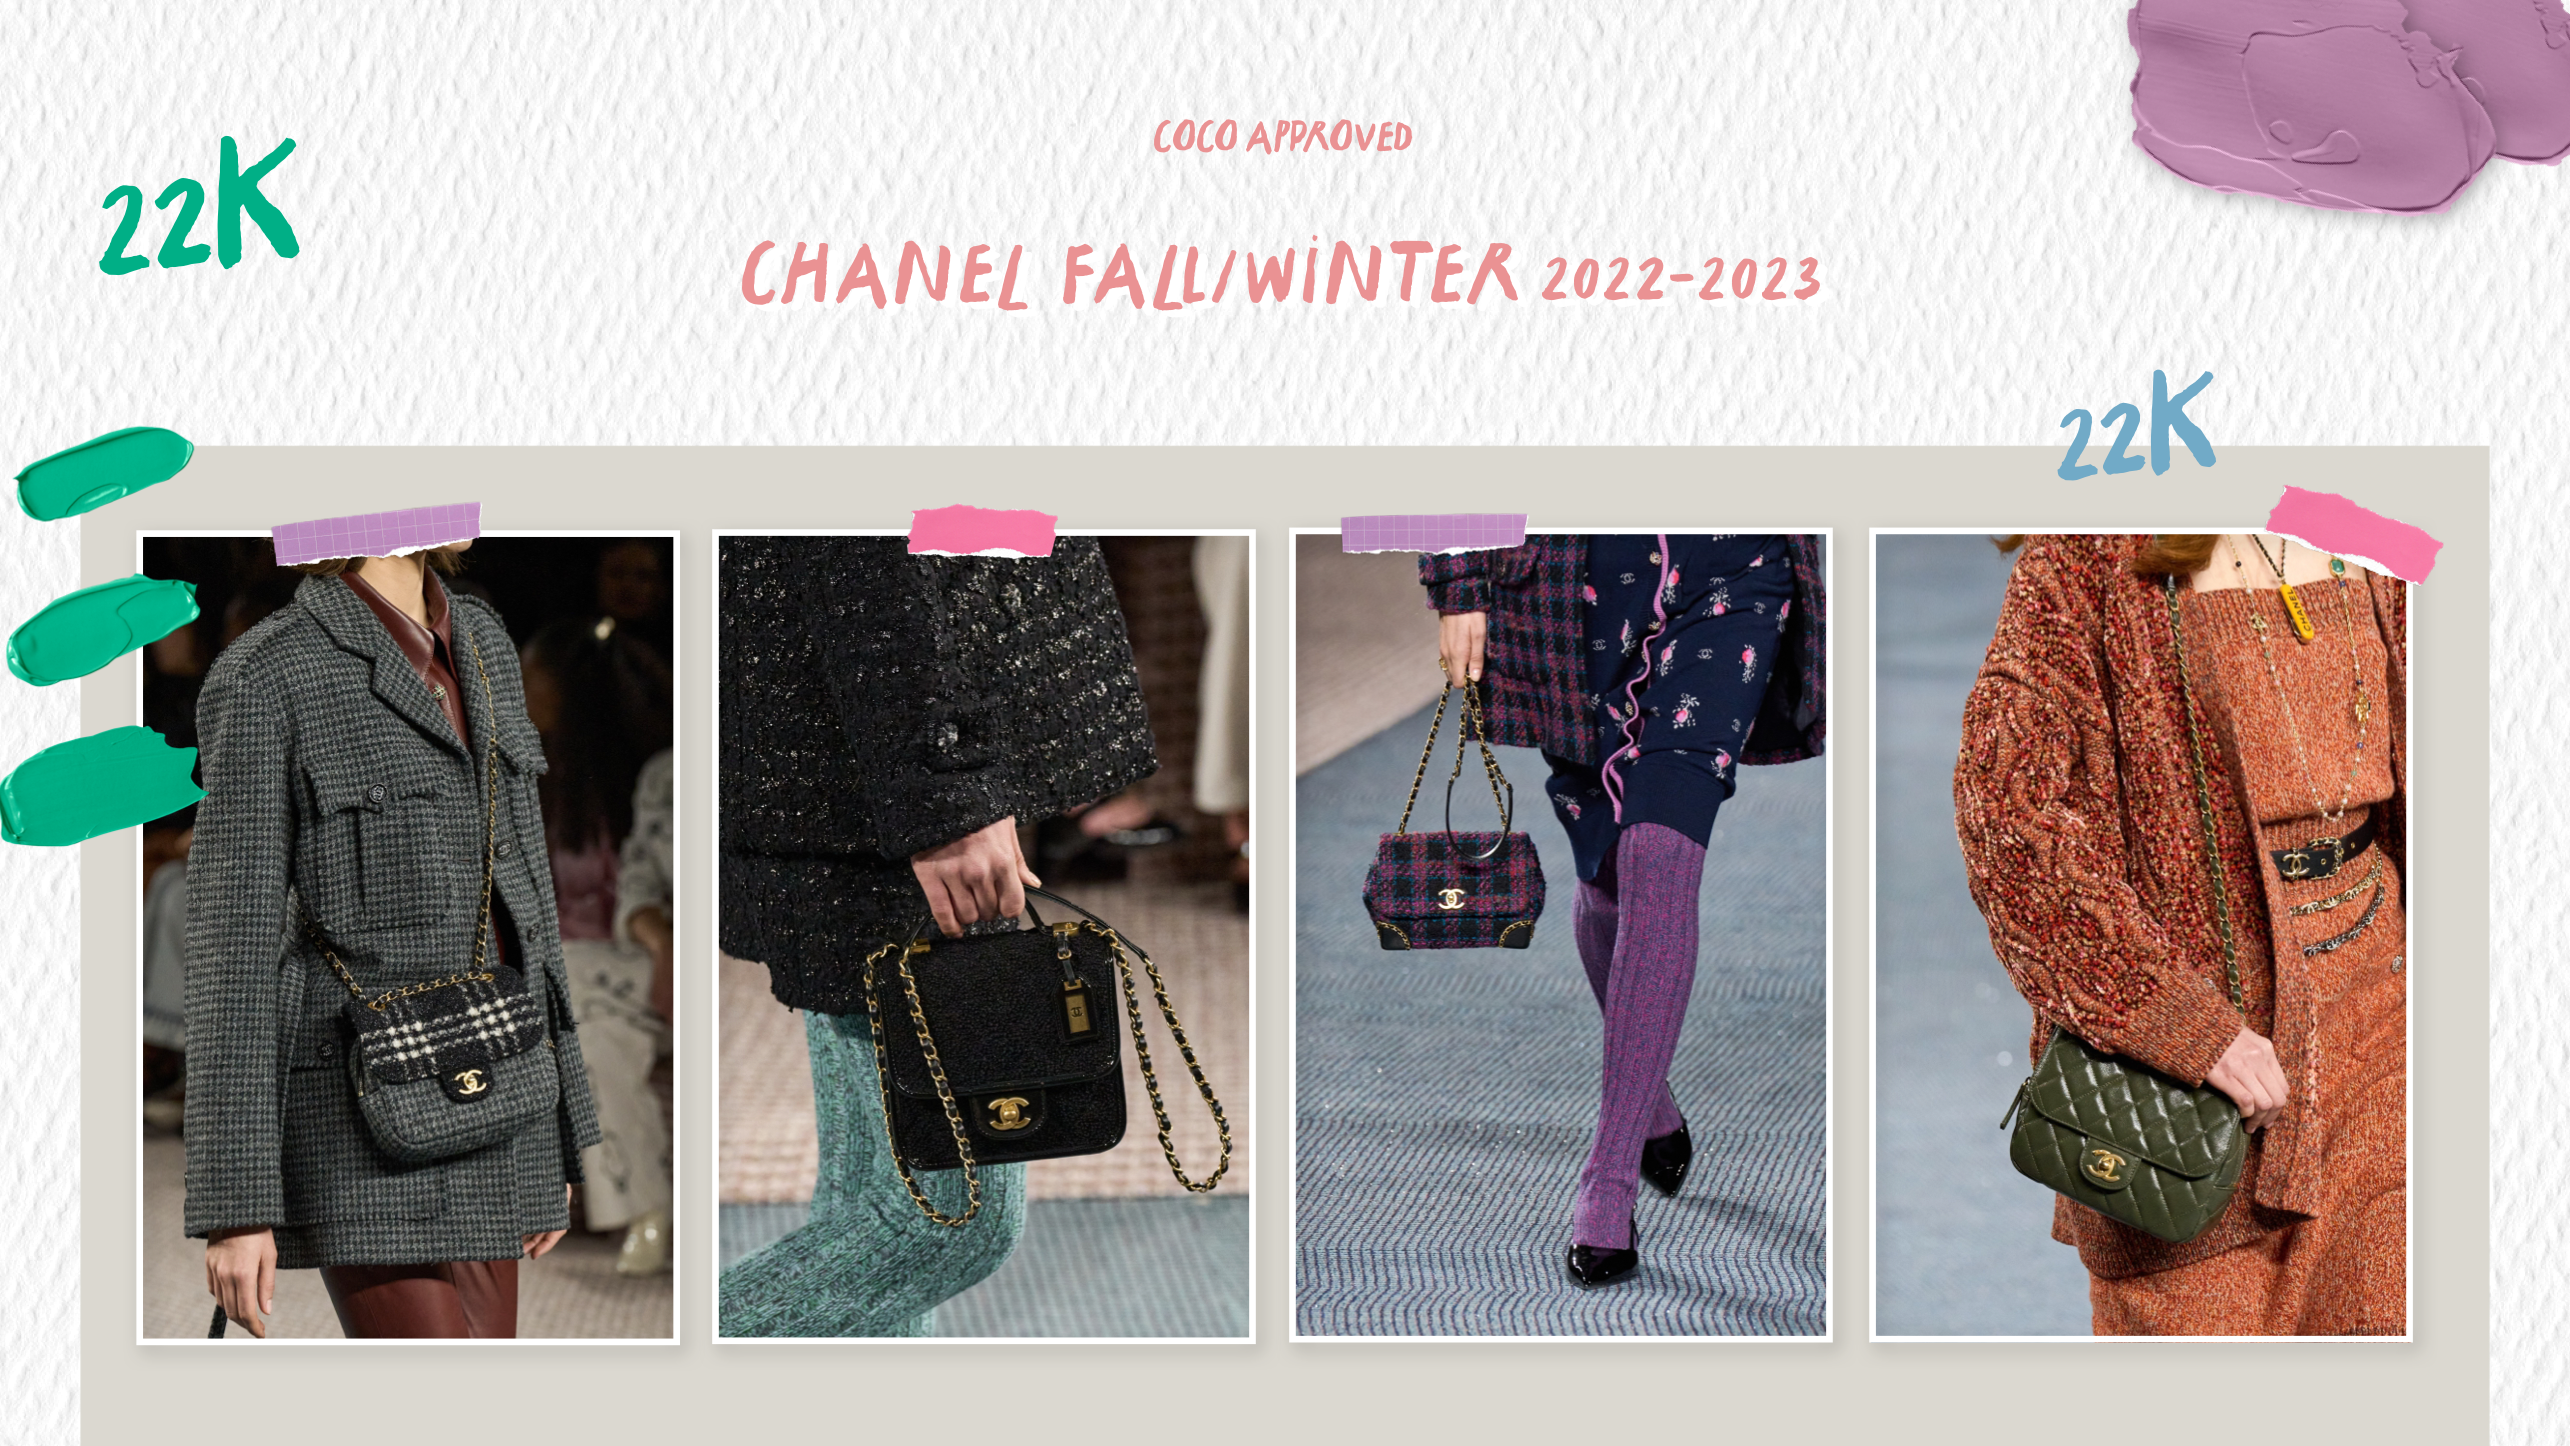 CHANEL FALL-WINTER 2022/23 PRE-COLLECTION (22B) REVIEW: Colors